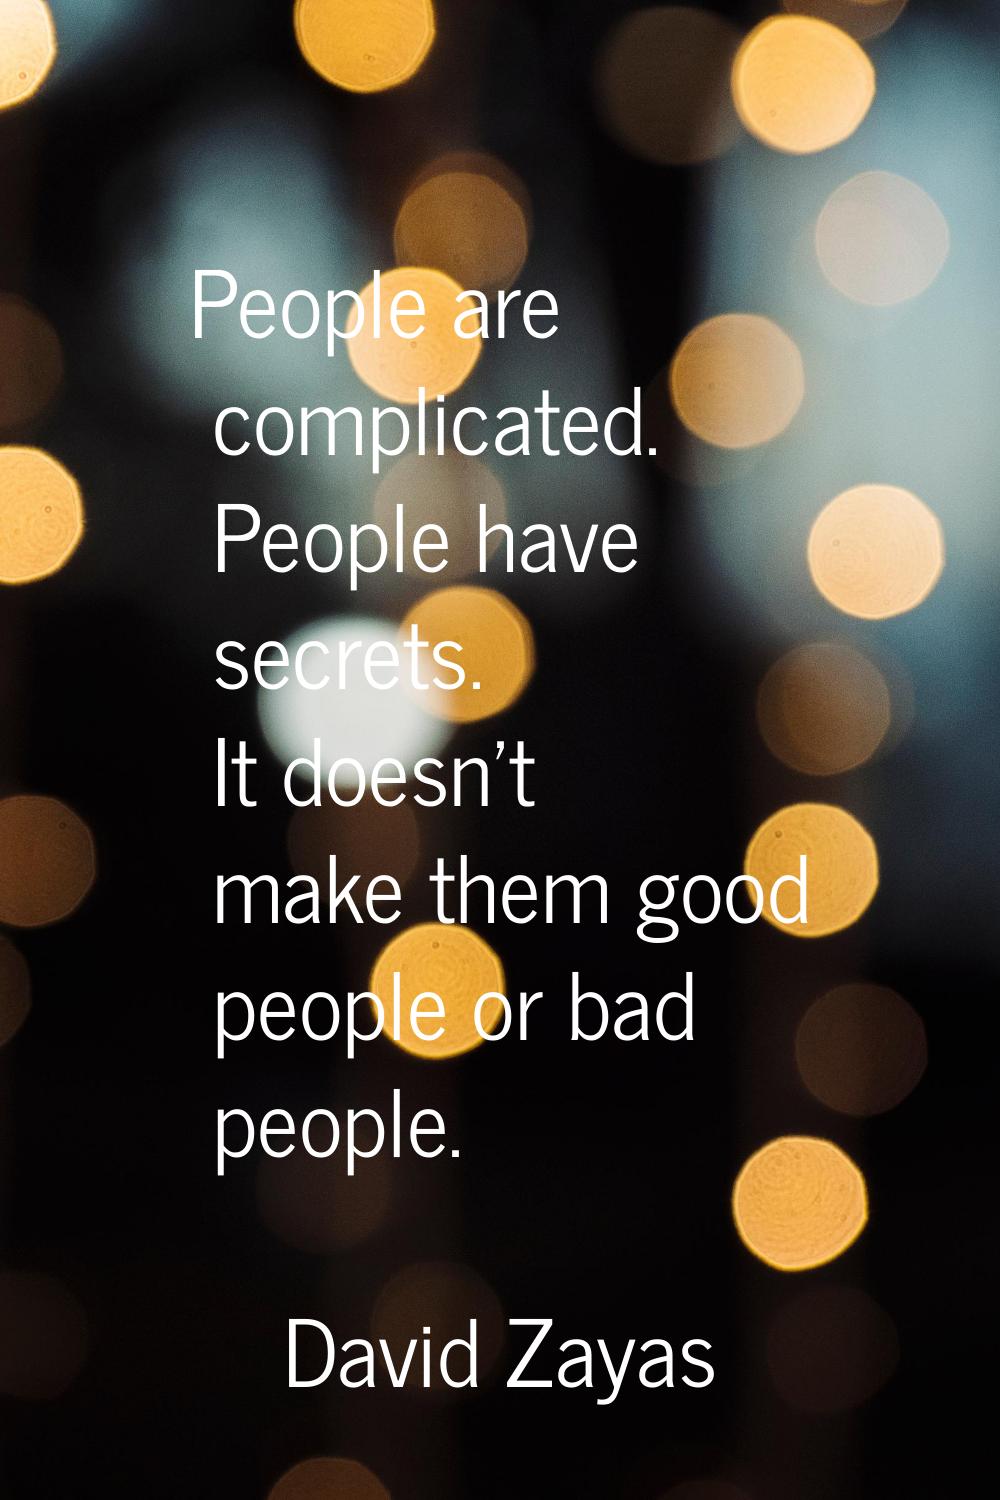 People are complicated. People have secrets. It doesn't make them good people or bad people.